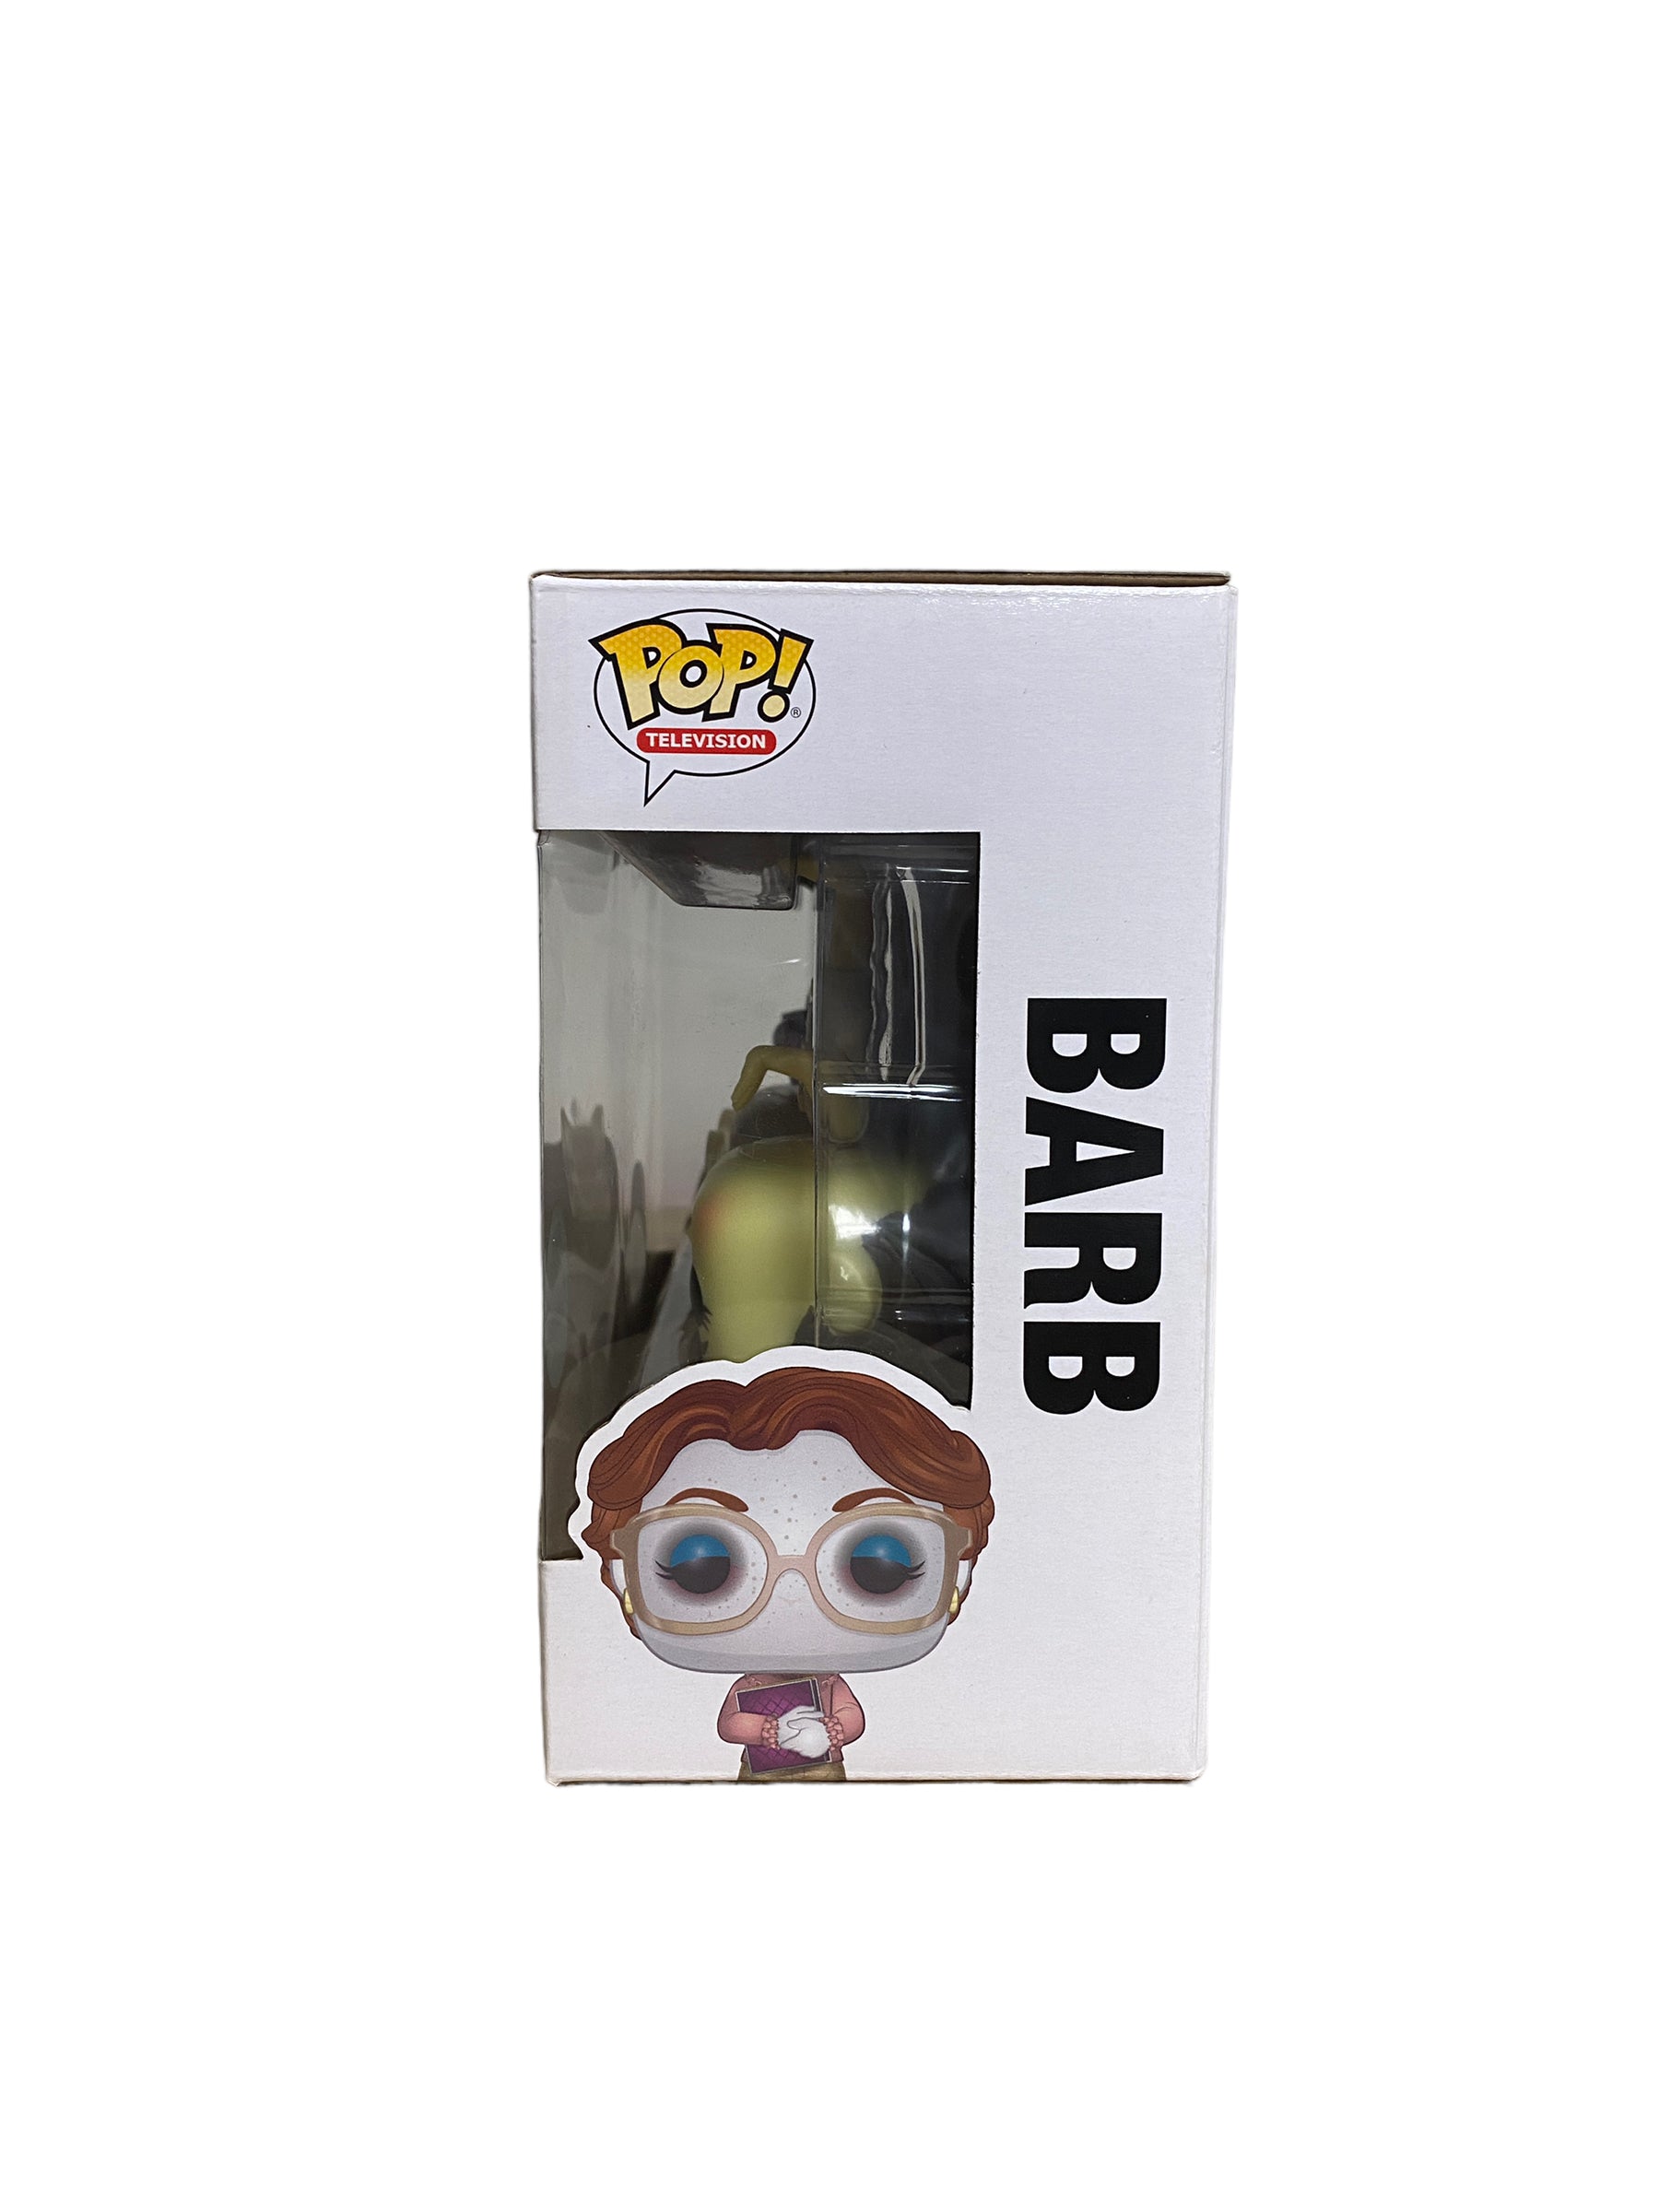 Upside Down Eleven / Barb 2 Pack Funko Pop! - Stranger Things - ECCC 2017 Shared Exclusive - Condition 8.5/10